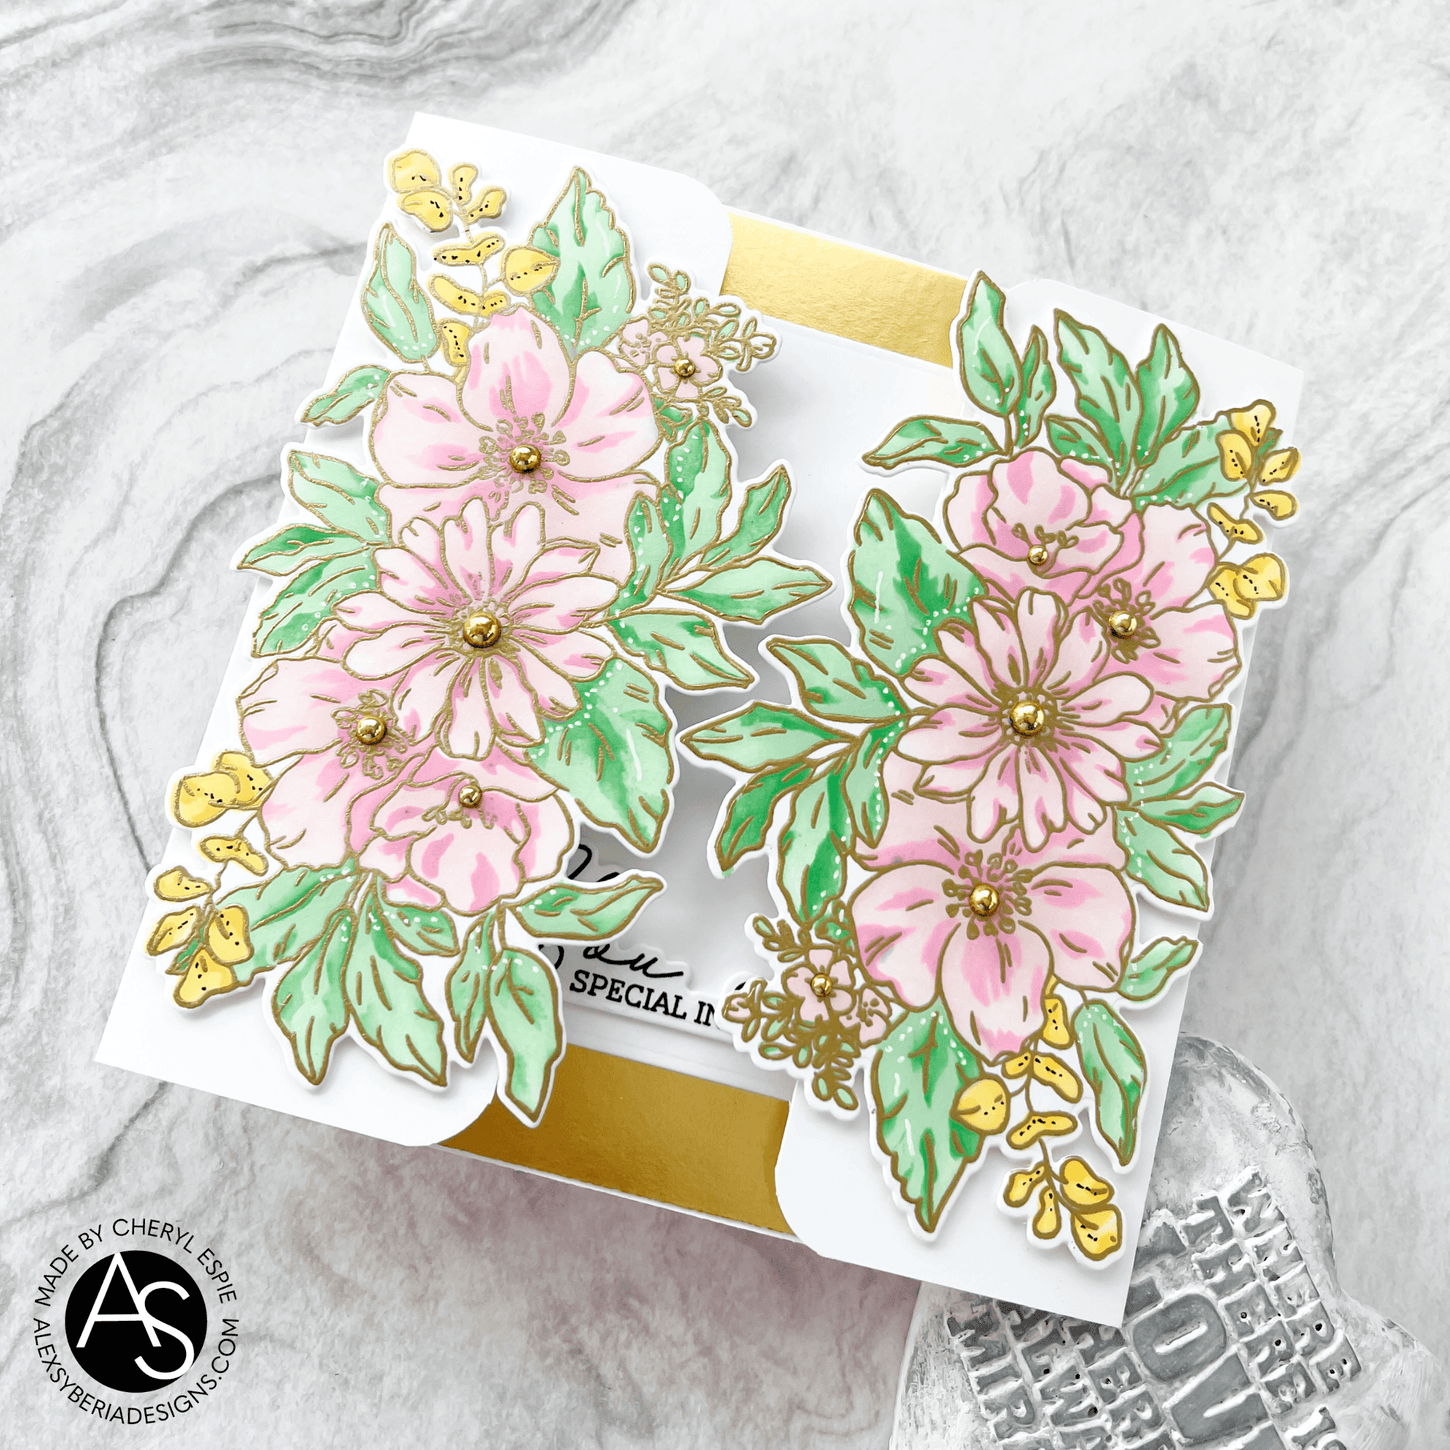 Life-is-good-die-set-alex-syberia-designs-bouquet-layering-stamps-cardmaking-coloring-popular-brands-stencils-diecutting-handmadecards-how-to-layering-stencils